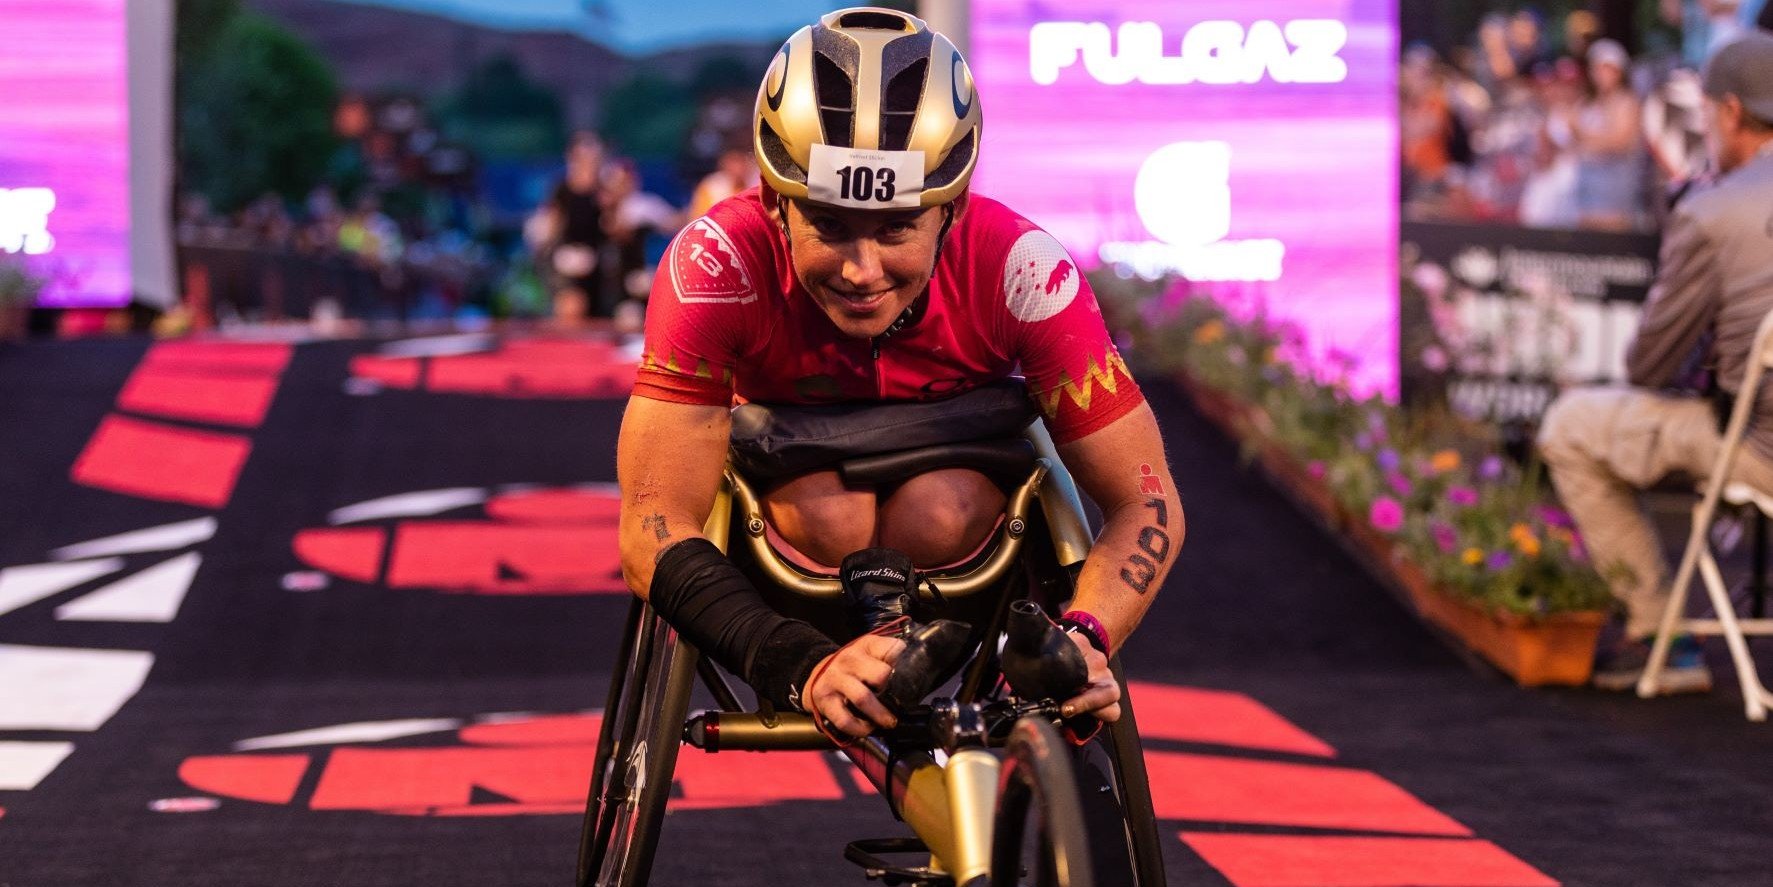 In May 2021 Lauren Parker became only the third female in the handcycle division to finish the IRONMAN World Championship - Photo Korupt Vision 